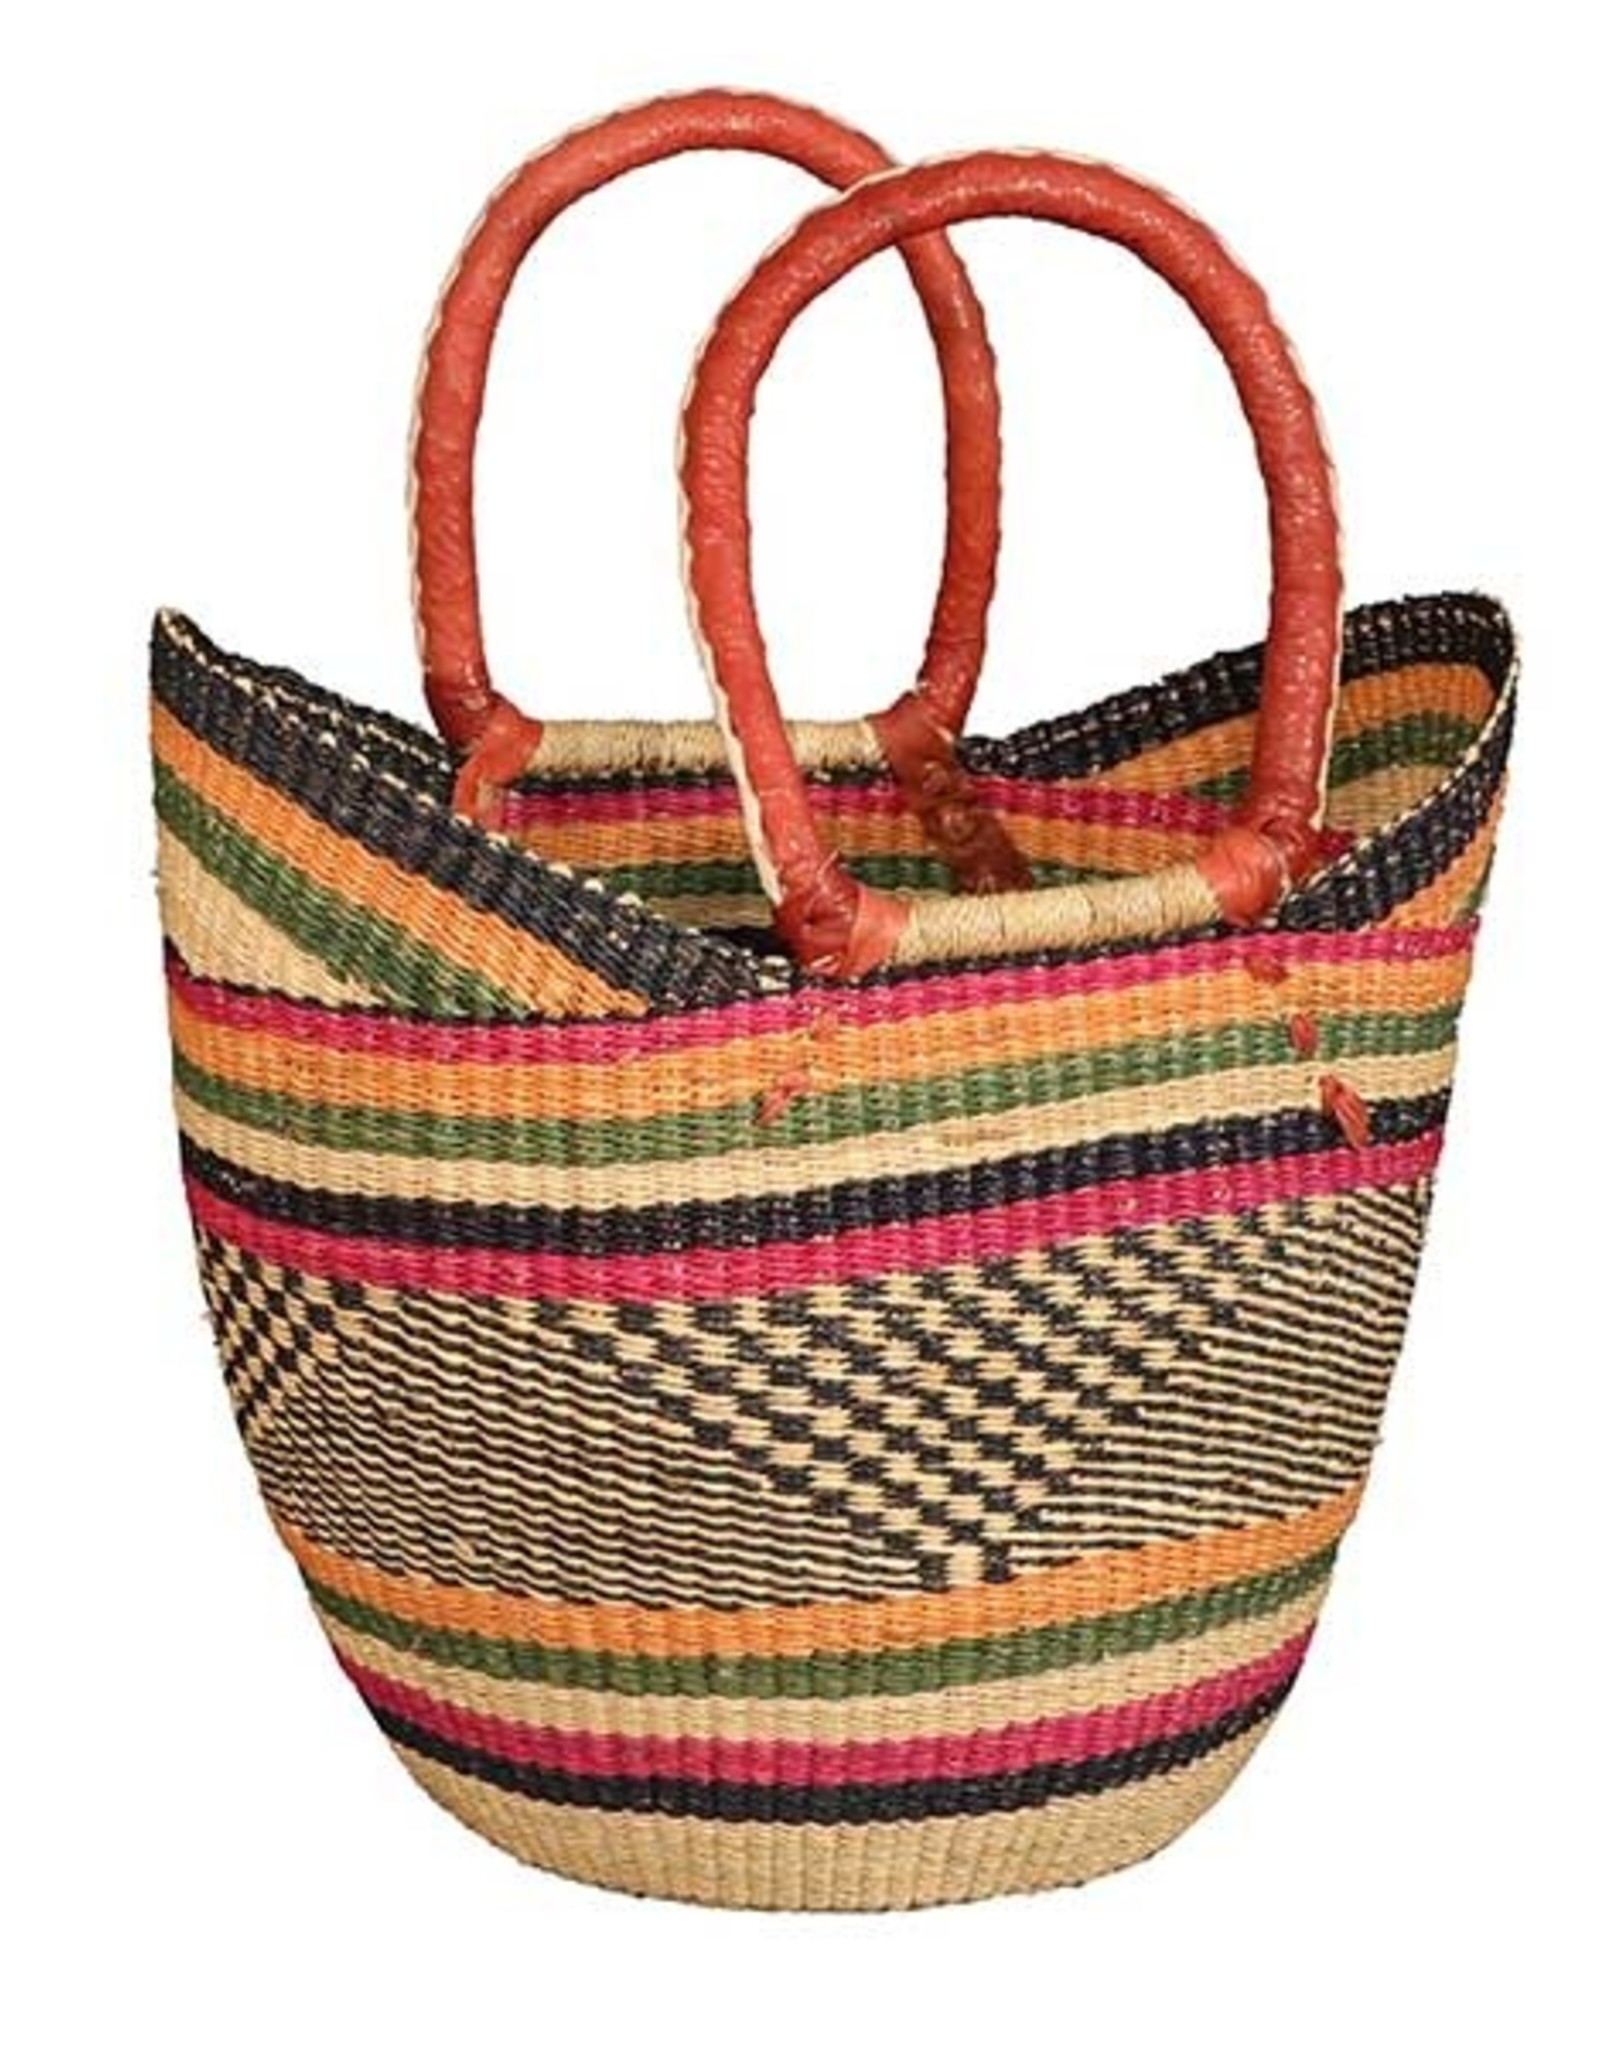 African Market Baskets Shopping Tote with Thin Rim